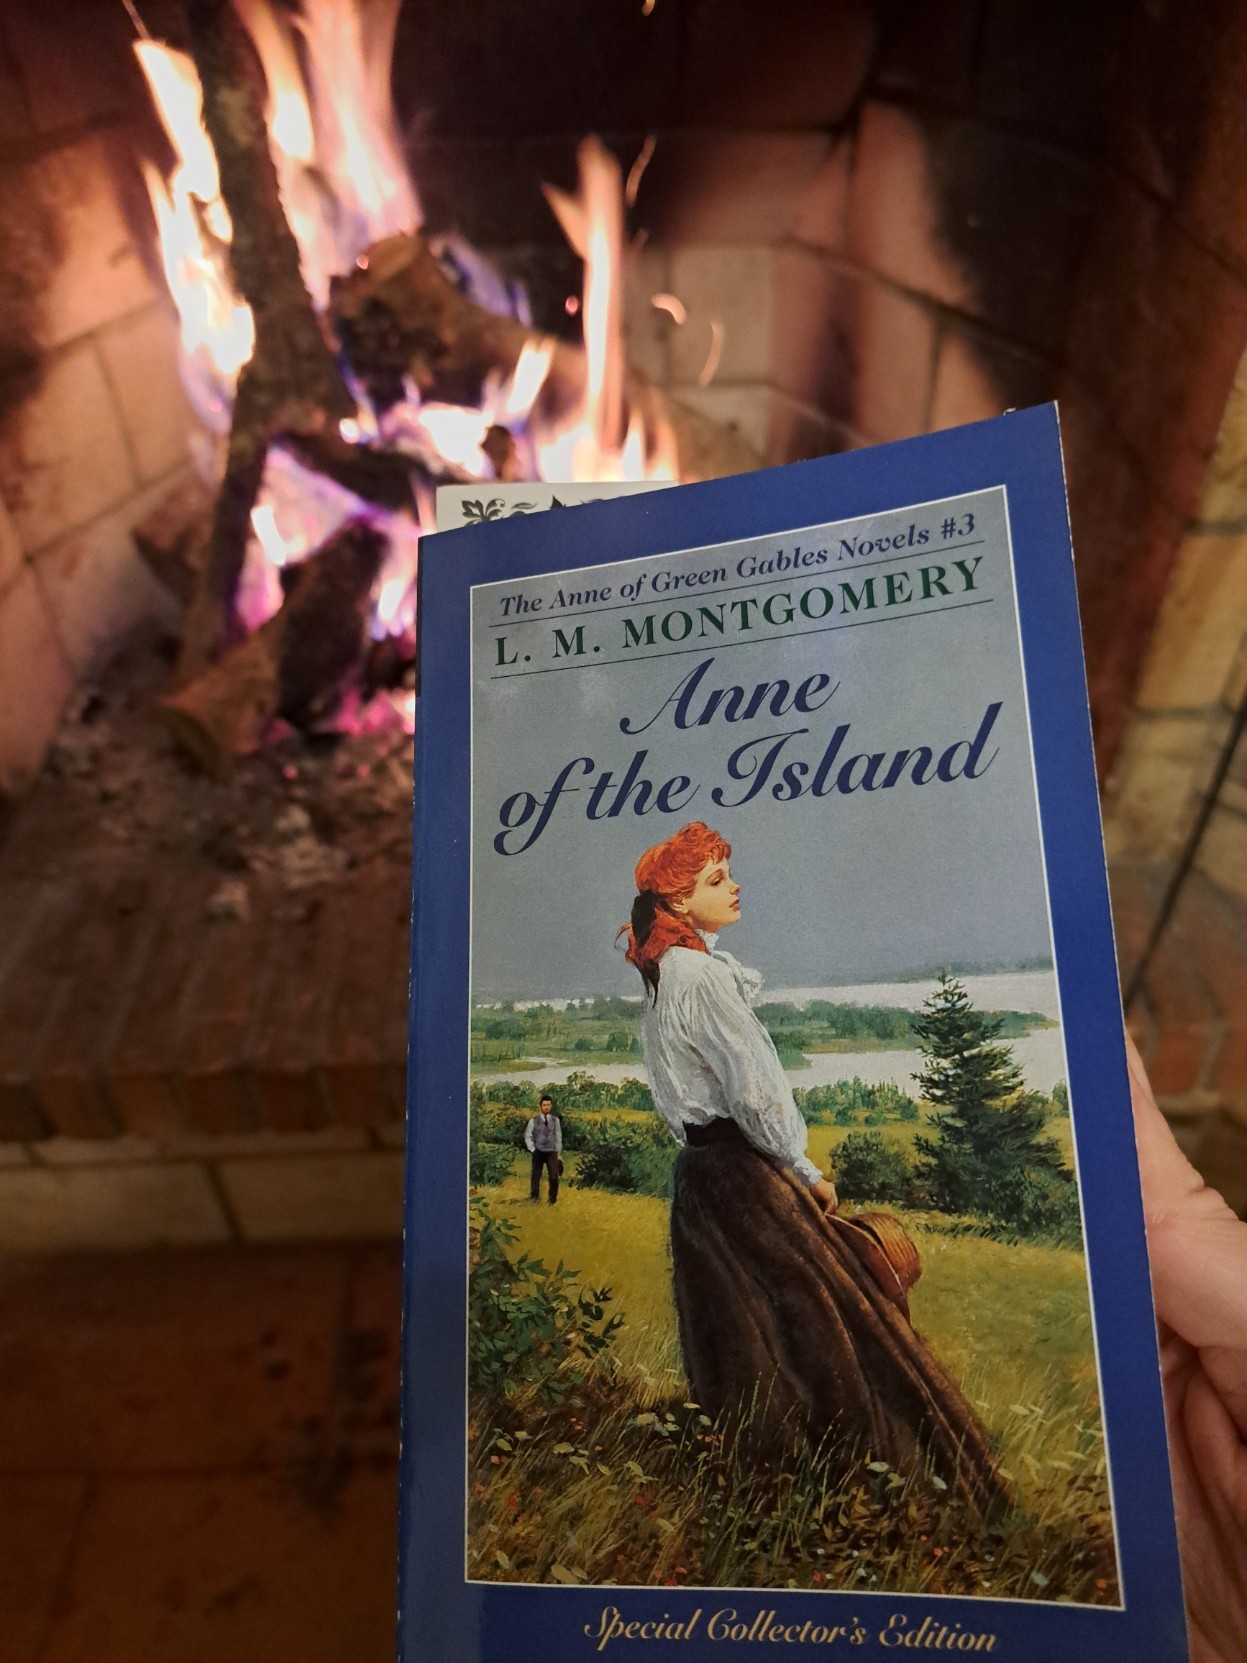 A picture of "Anne of the Island" (special collector's edition book), in front of a lightfire